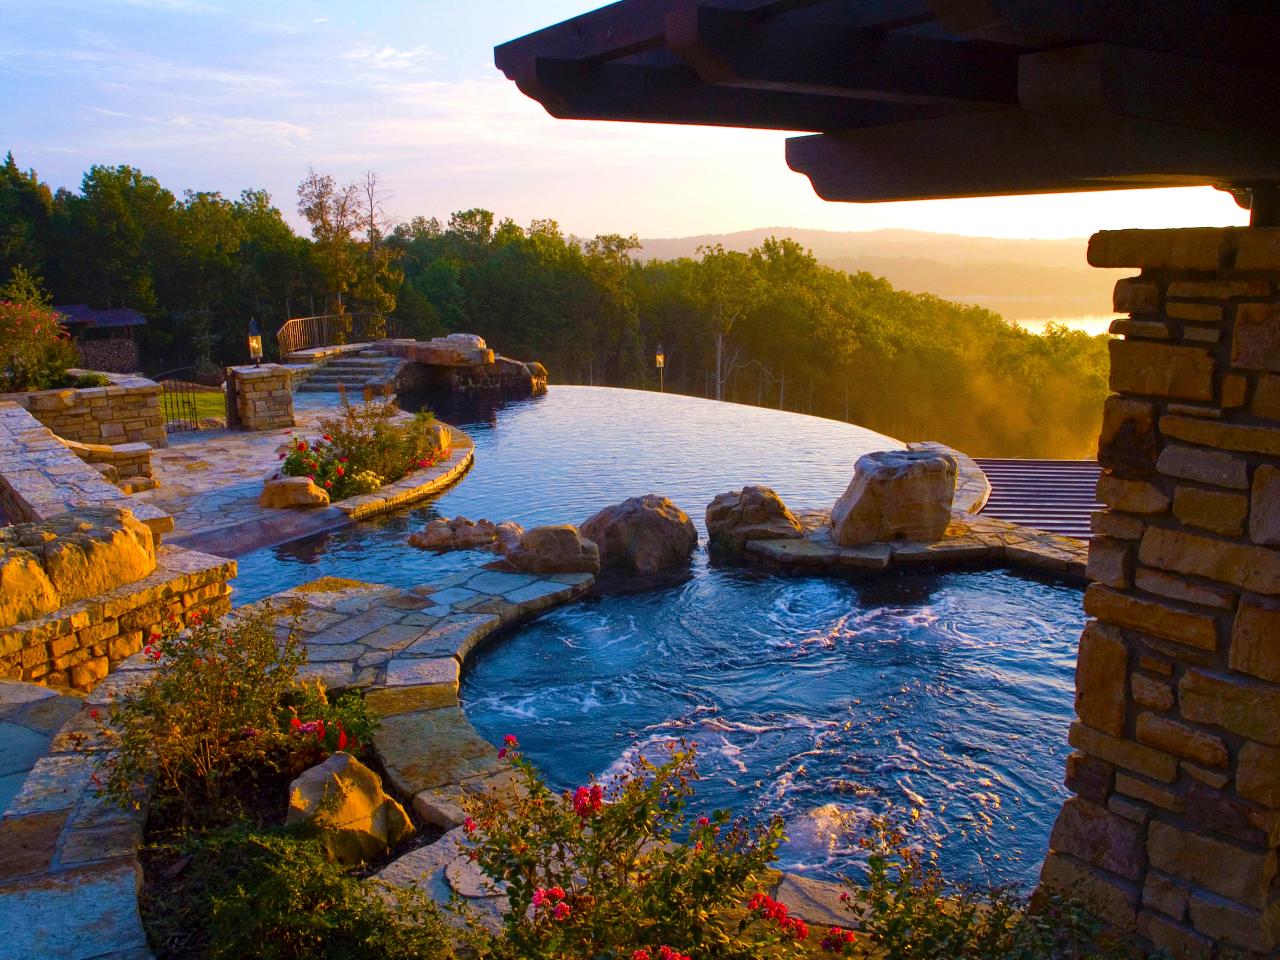 7 Sizzling Hot Tub Designs | Outdoor Design - Landscaping ...